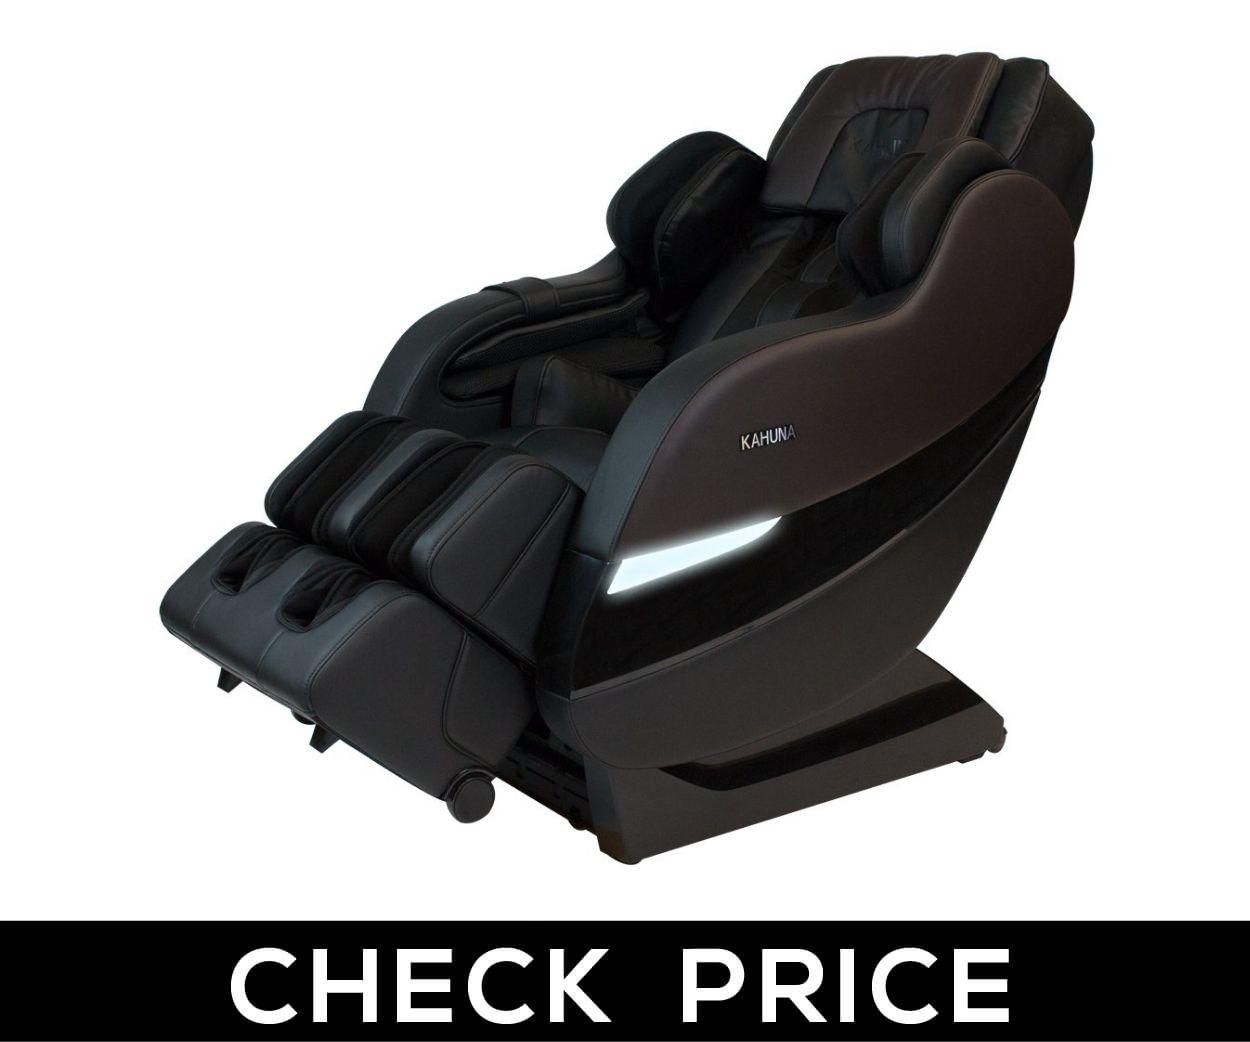 Kahuna SM-7300 – Best Massage Chair for Home